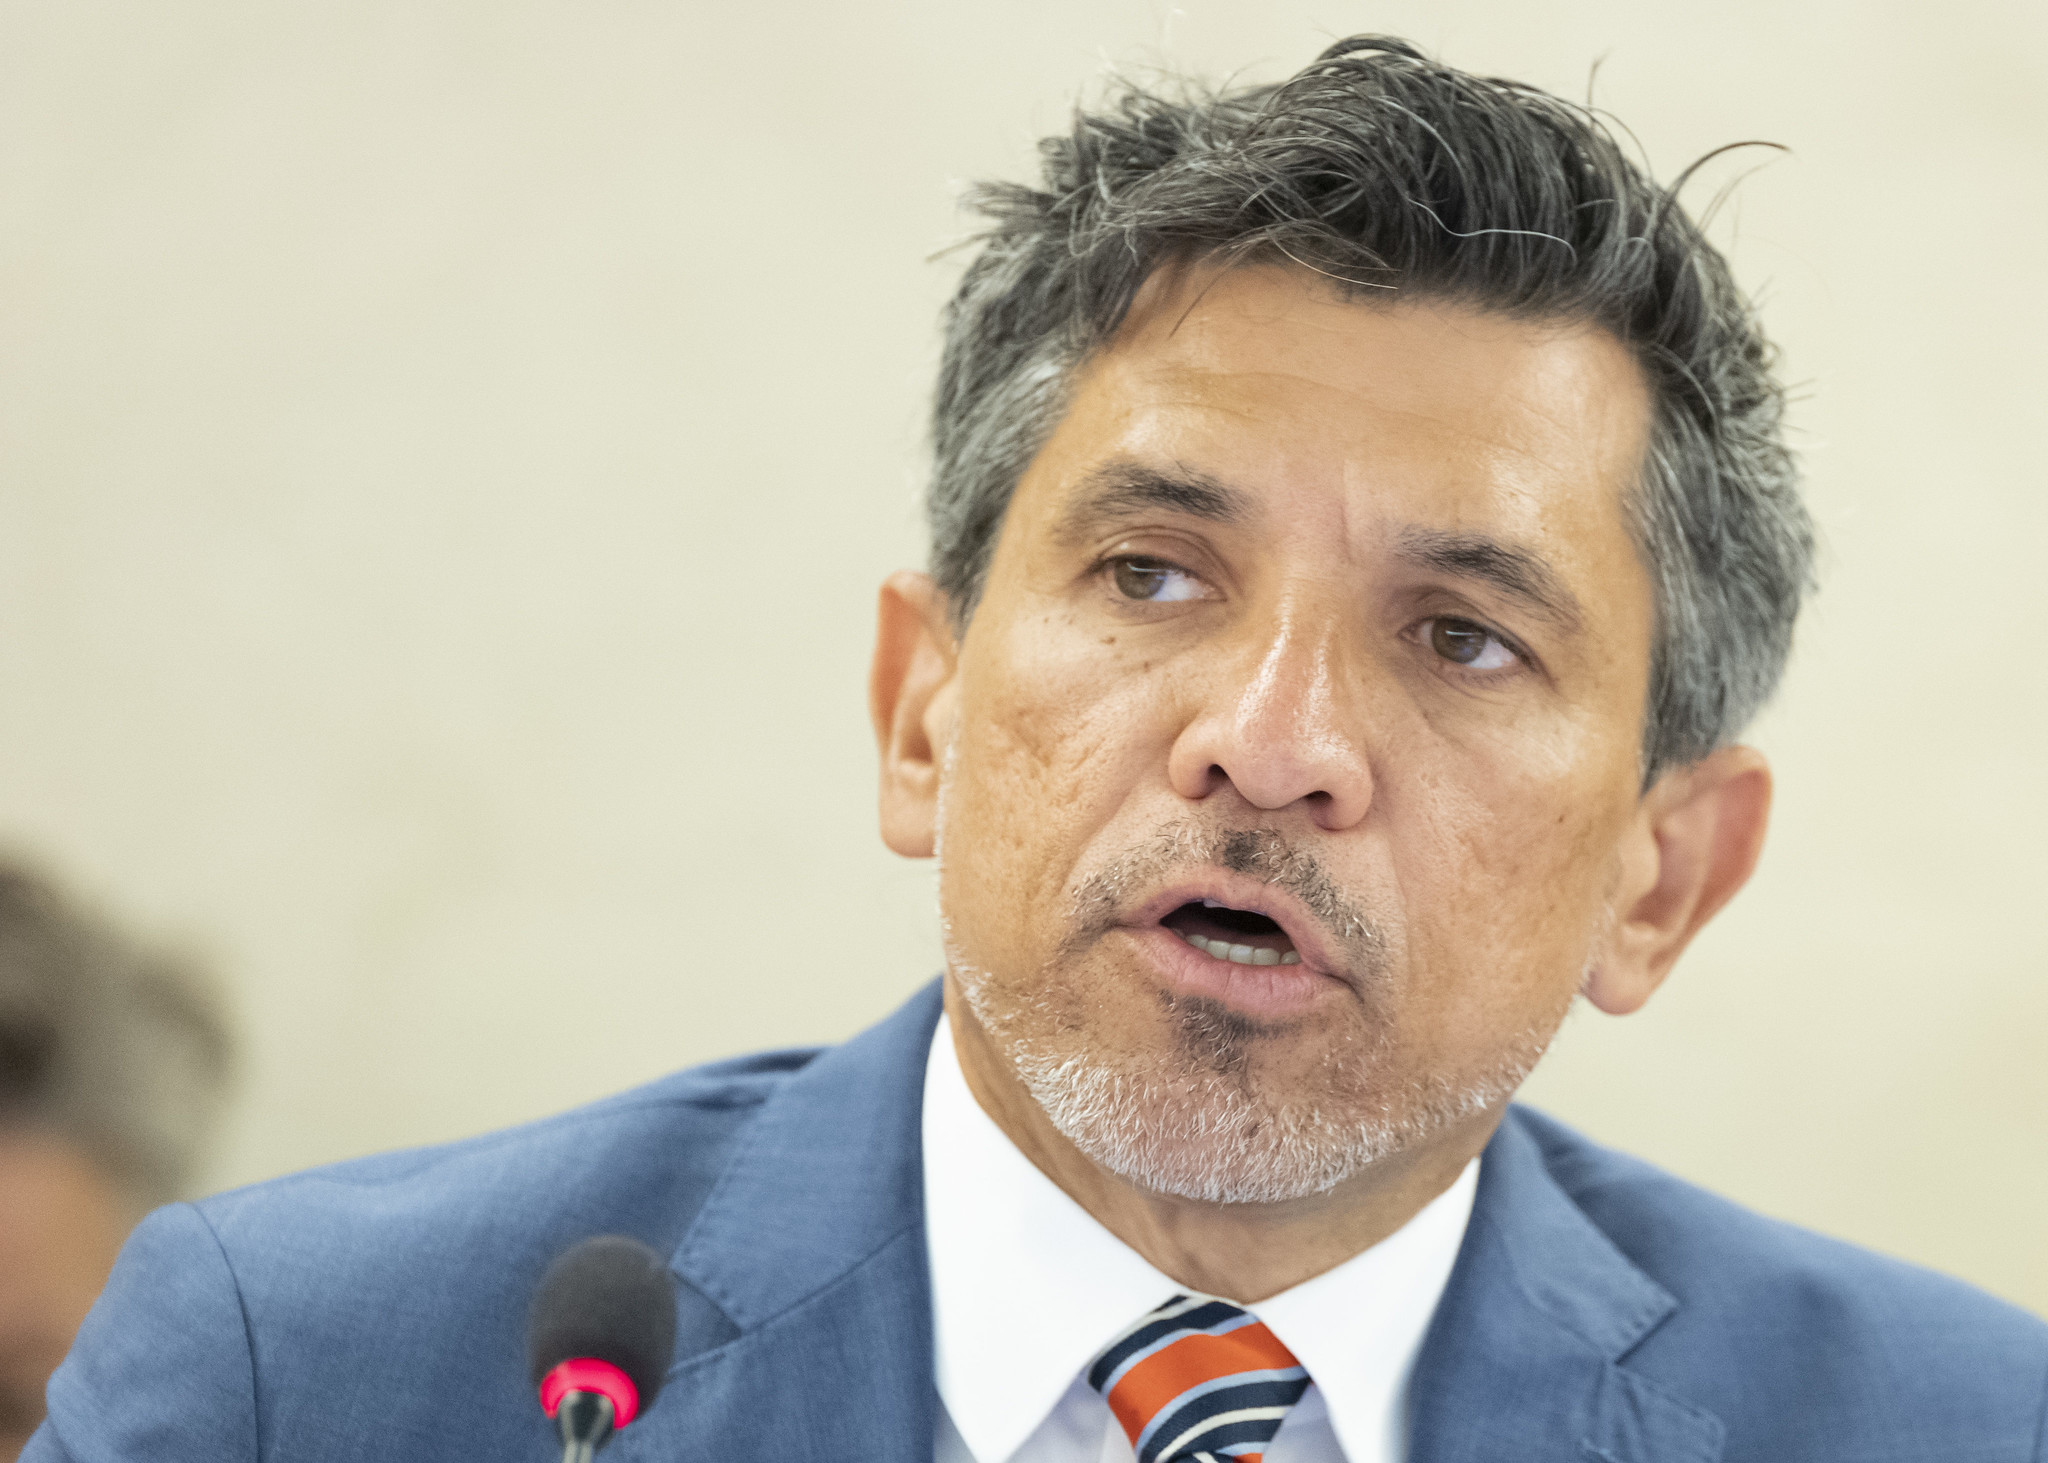 Victor Madrigal-Borloz Independent Expert on protection against violence and discrimination based on sexual orientation and gender identity (SOGI) present she report on his missions to Georgia and Mozambique during 41st Session of the Human Rights Council. 24 june 2019. UN Photo/ Jean Marc Ferré